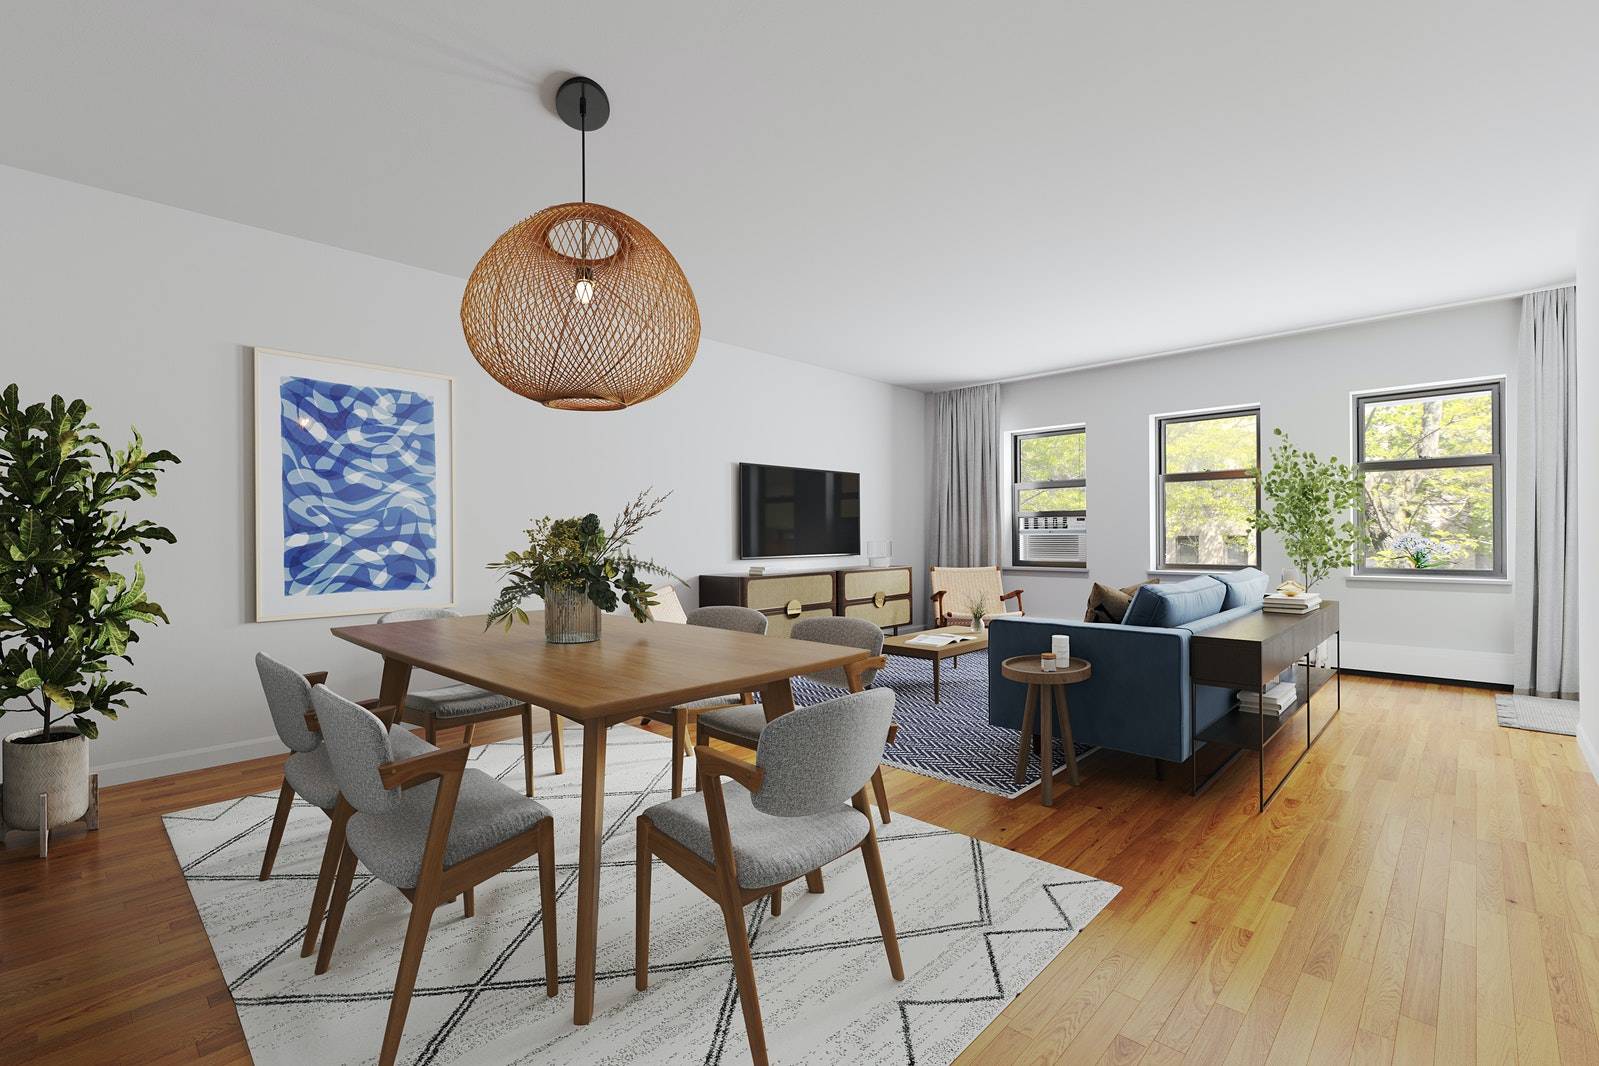 Residence 2D at 128 Freeman Street is a spacious 2 bedroom condo located on a tree lined street between the heart of Greenpoint's hot spots and the beautiful waterfront.